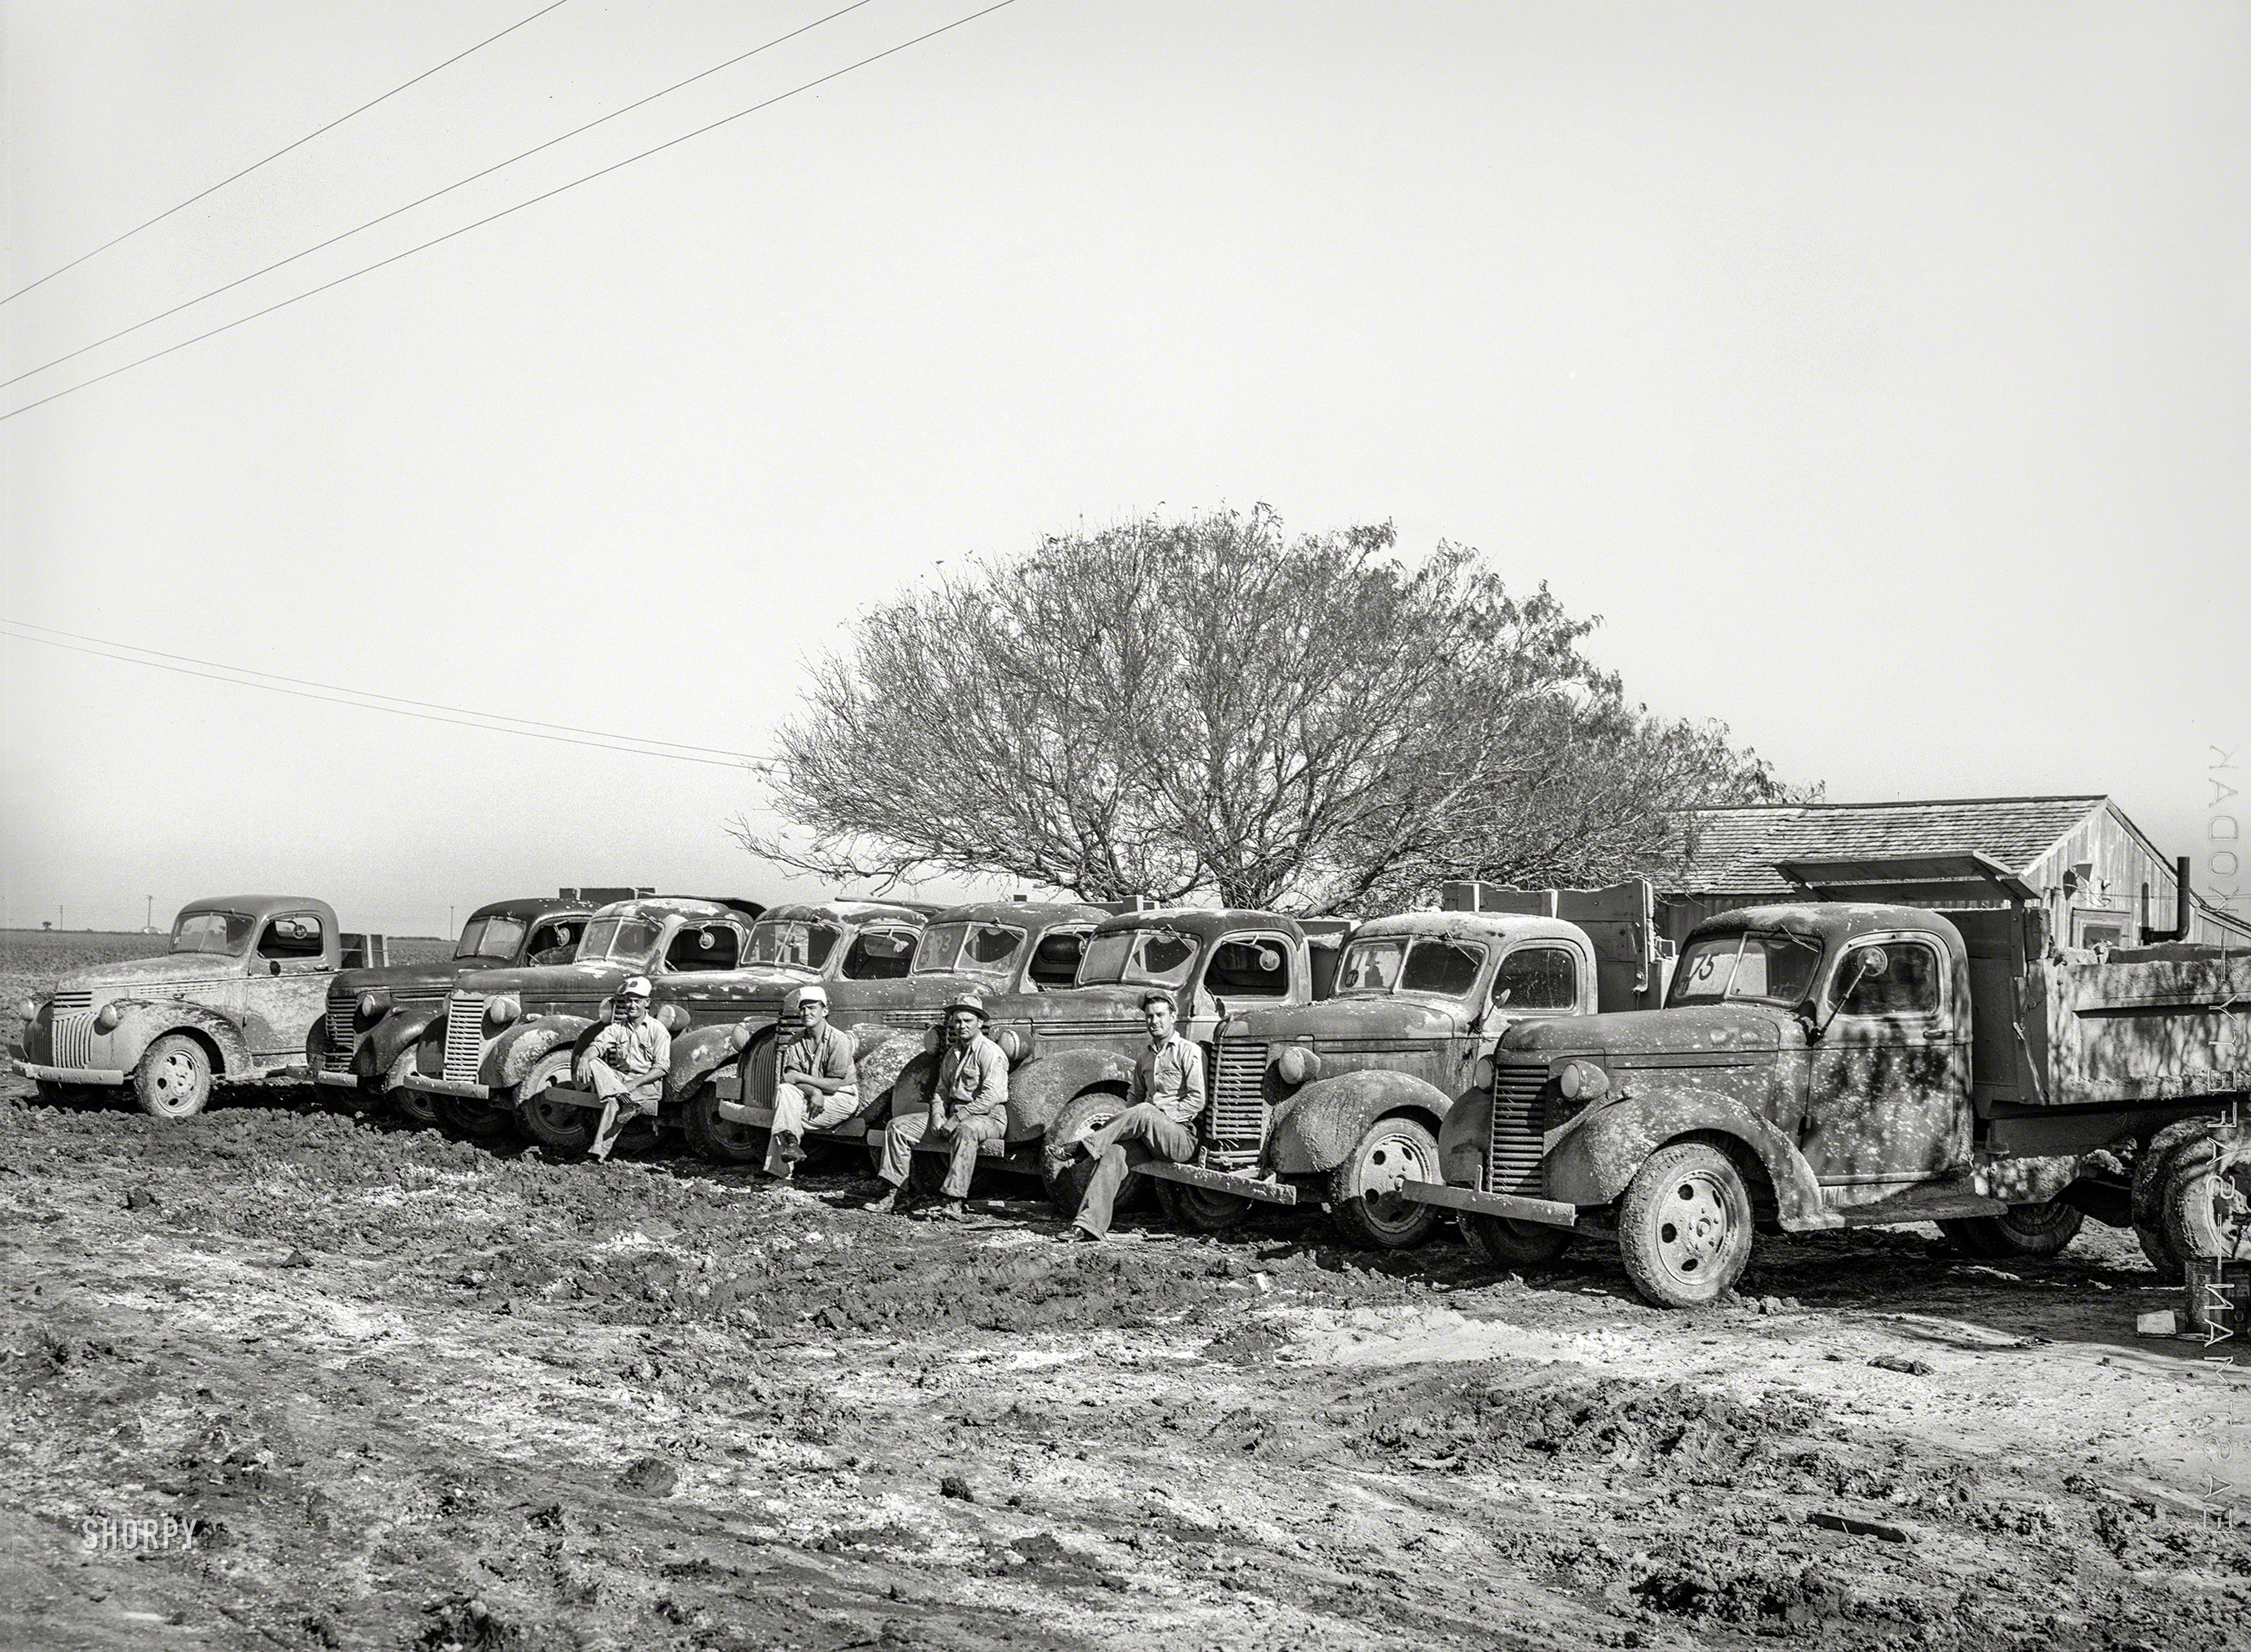 December 1940. "Lineup of trucks at workers' camp near naval air base now under construction. Corpus Christi, Texas." Photo by Russell Lee. View full size.